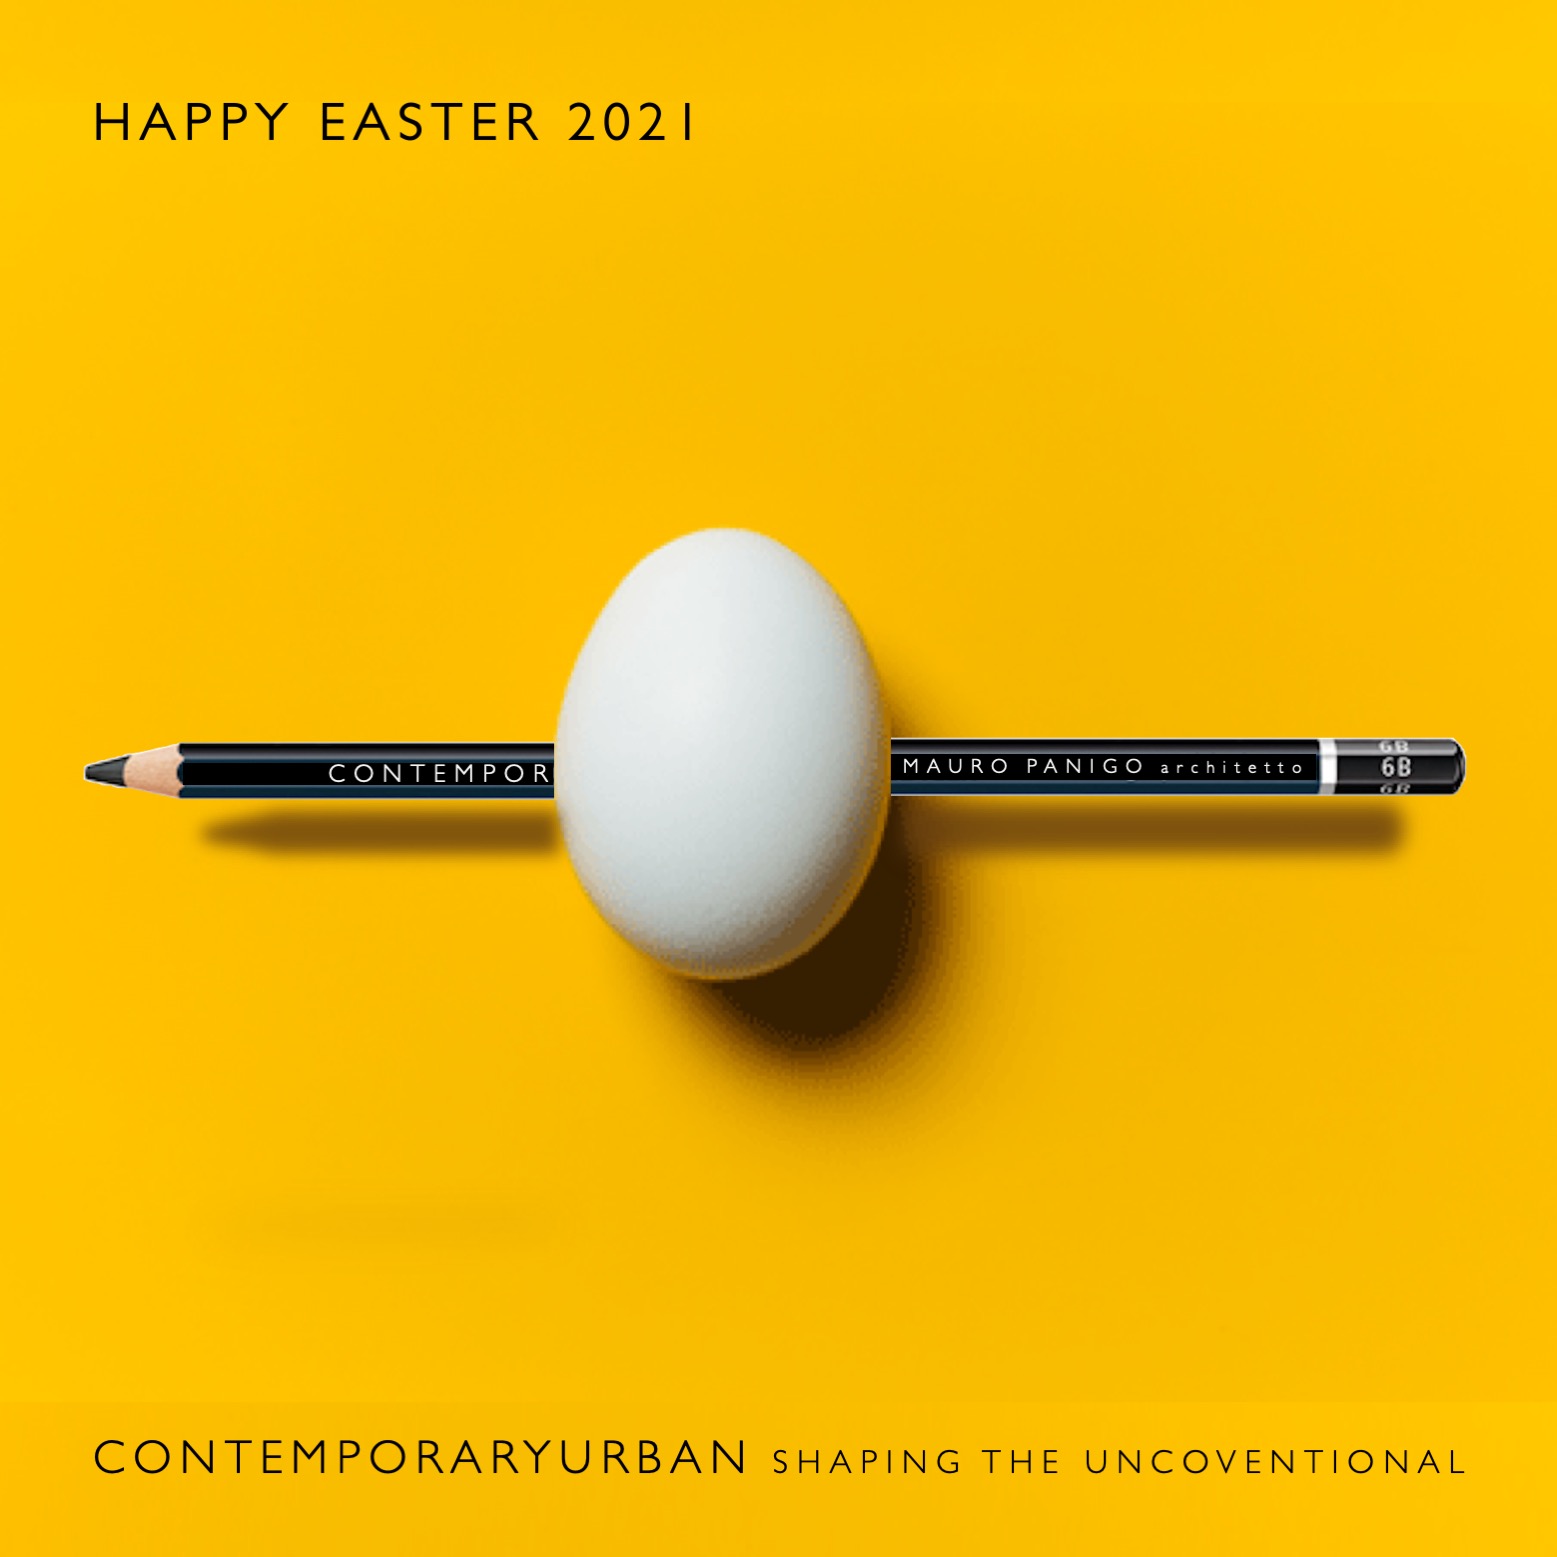 HAPPY EASTER 2021